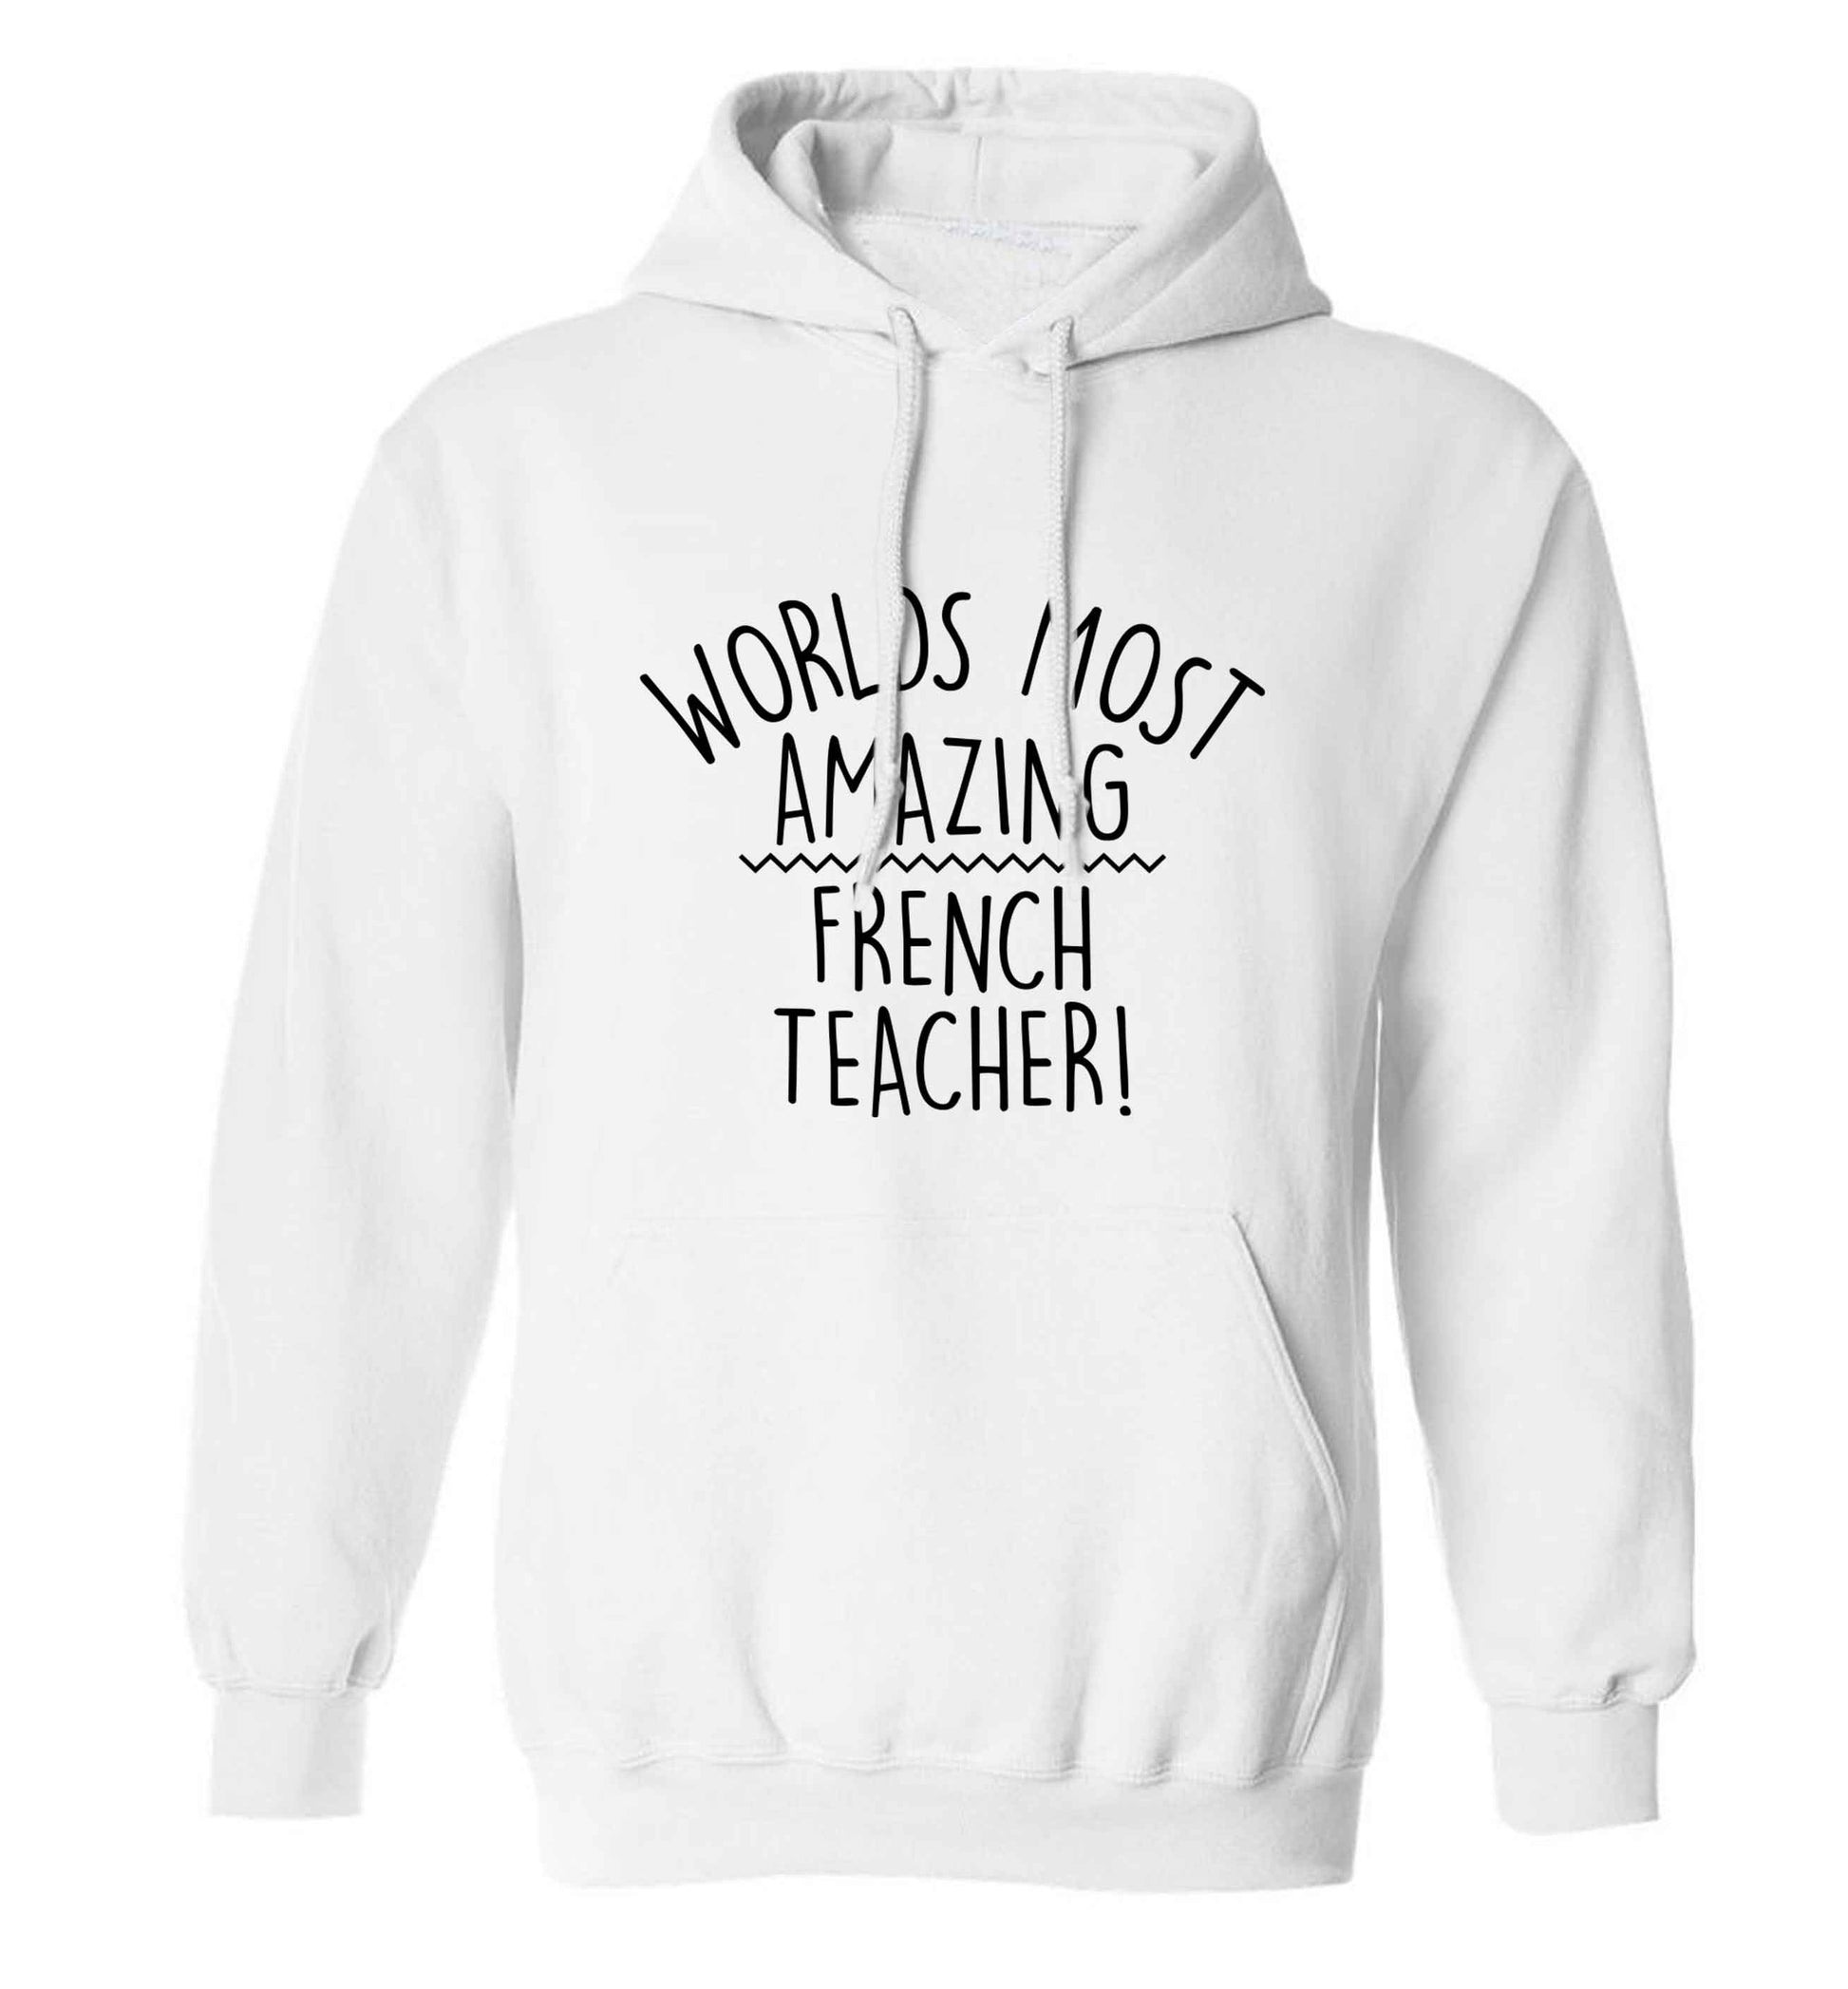 Worlds most amazing French teacher adults unisex white hoodie 2XL